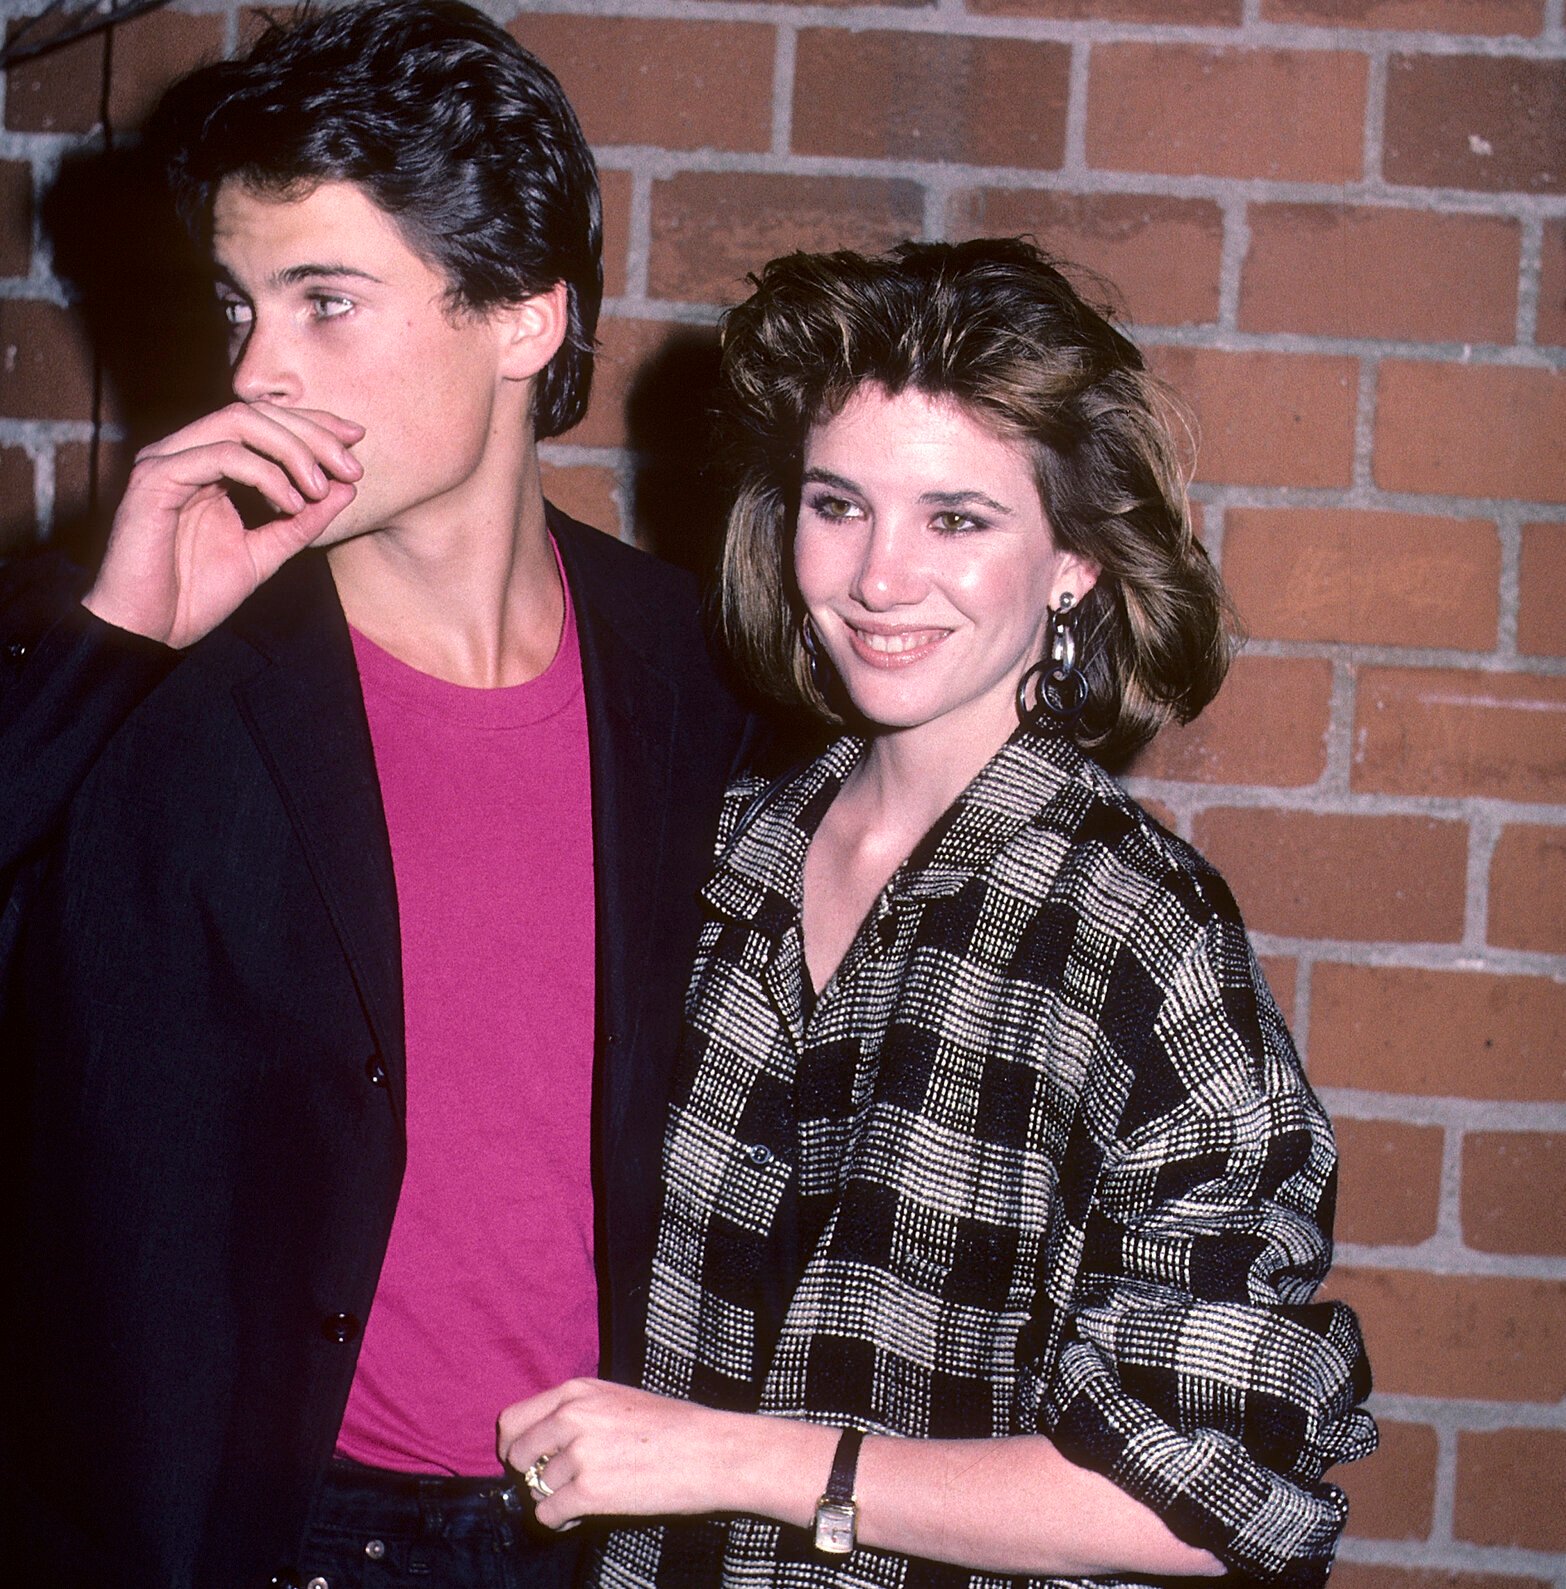 Rob Lowe and Melissa Gilbert at "The Hotel New Hampshire" West Hollywood Premiere on March 1, 1984